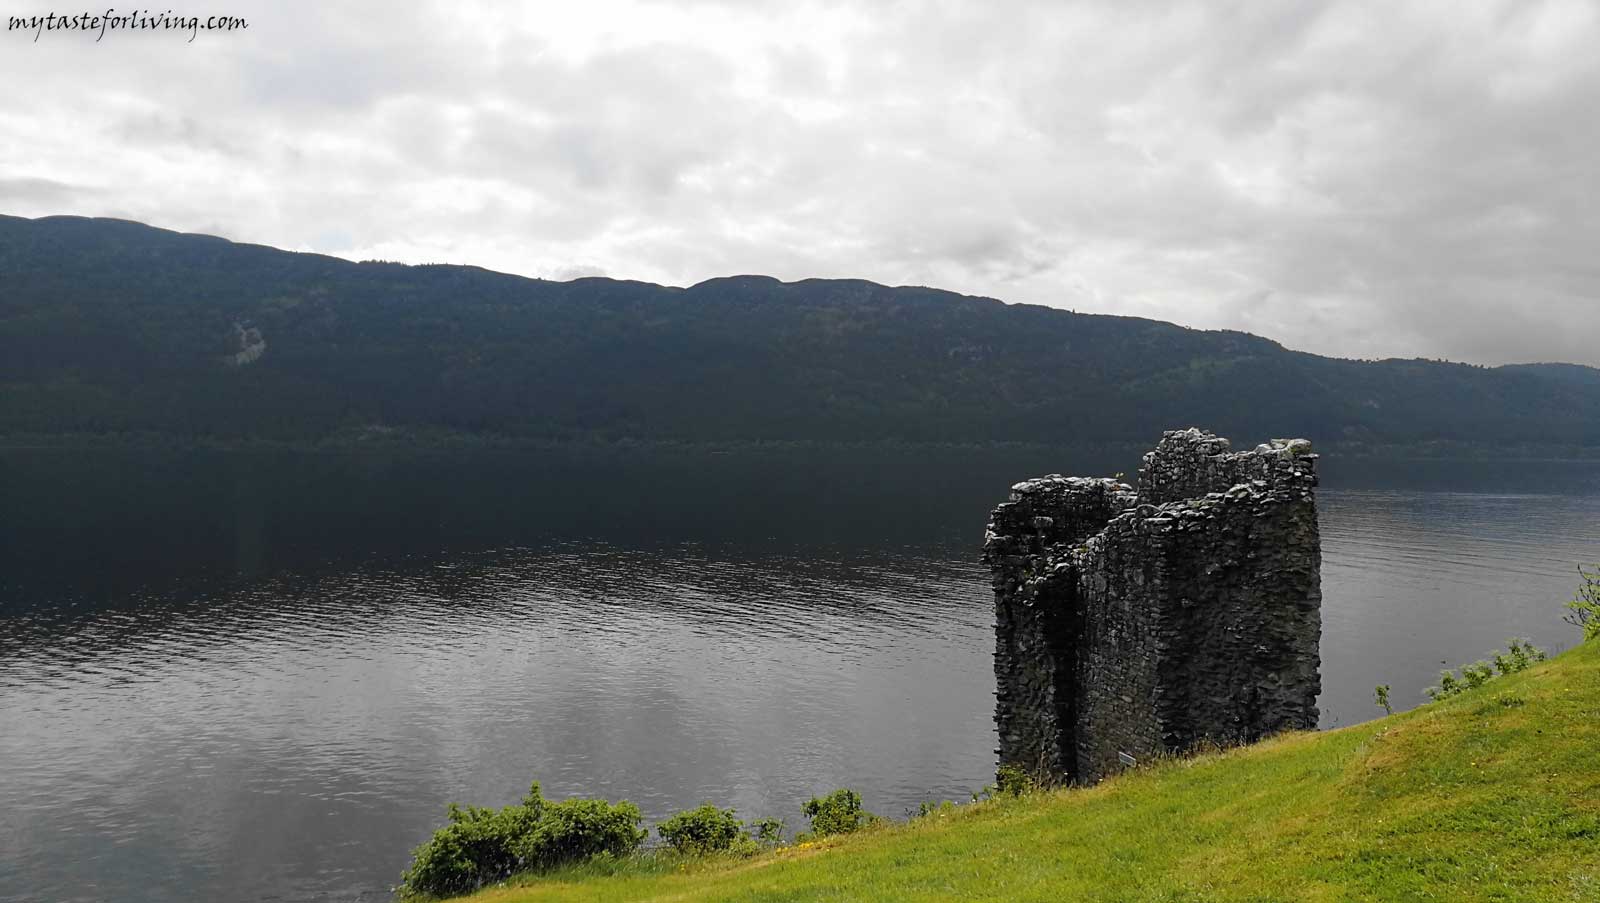 Urquhart is one of Scotland's largest castles. Its ruins are located on the shores of the famous and creepy Loch Ness lake.